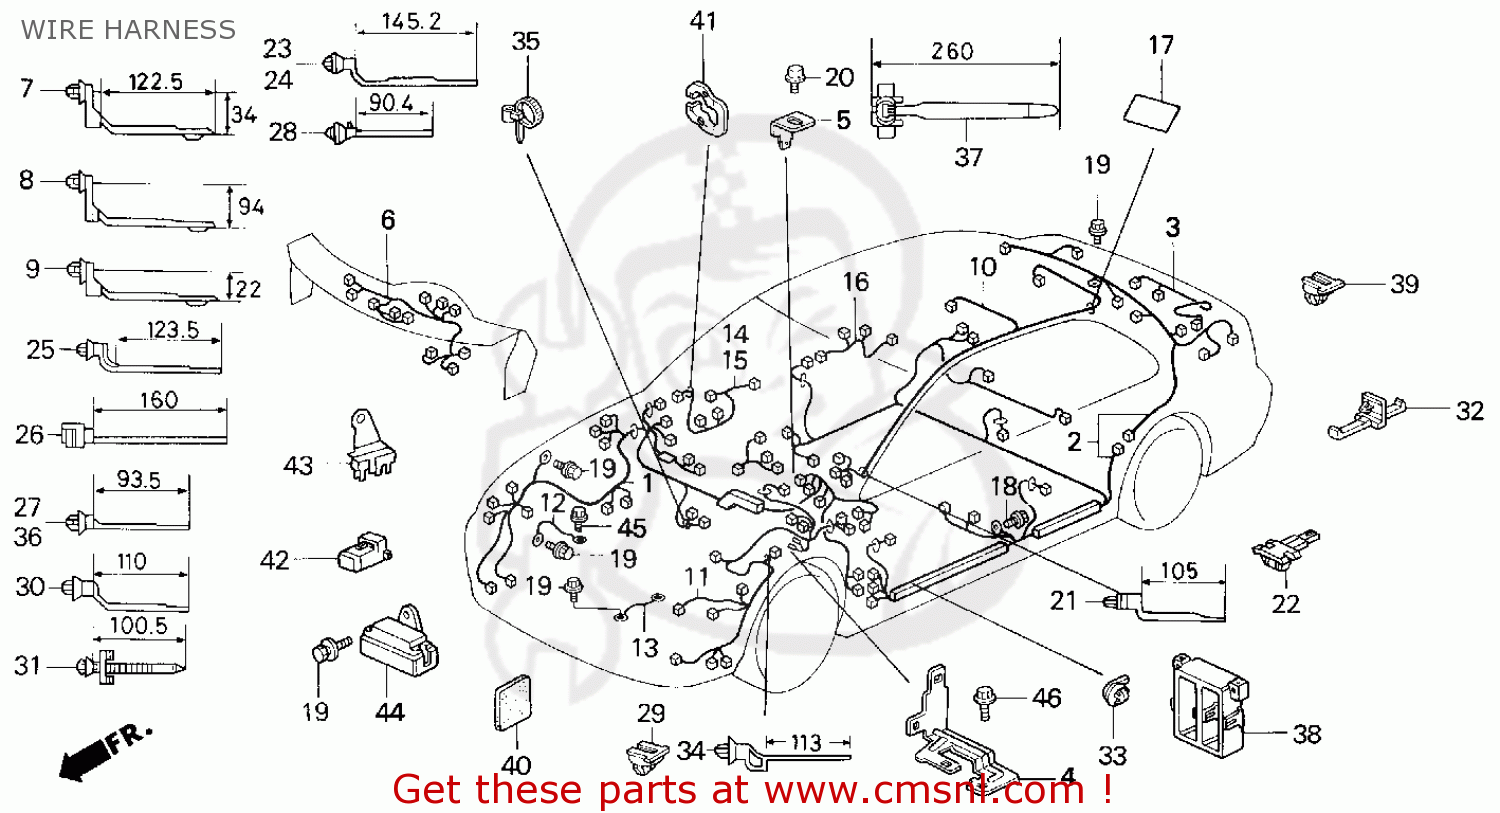 Honda CIVIC 1995 (S) 4DR LX (KA) WIRE HARNESS - buy WIRE HARNESS spares